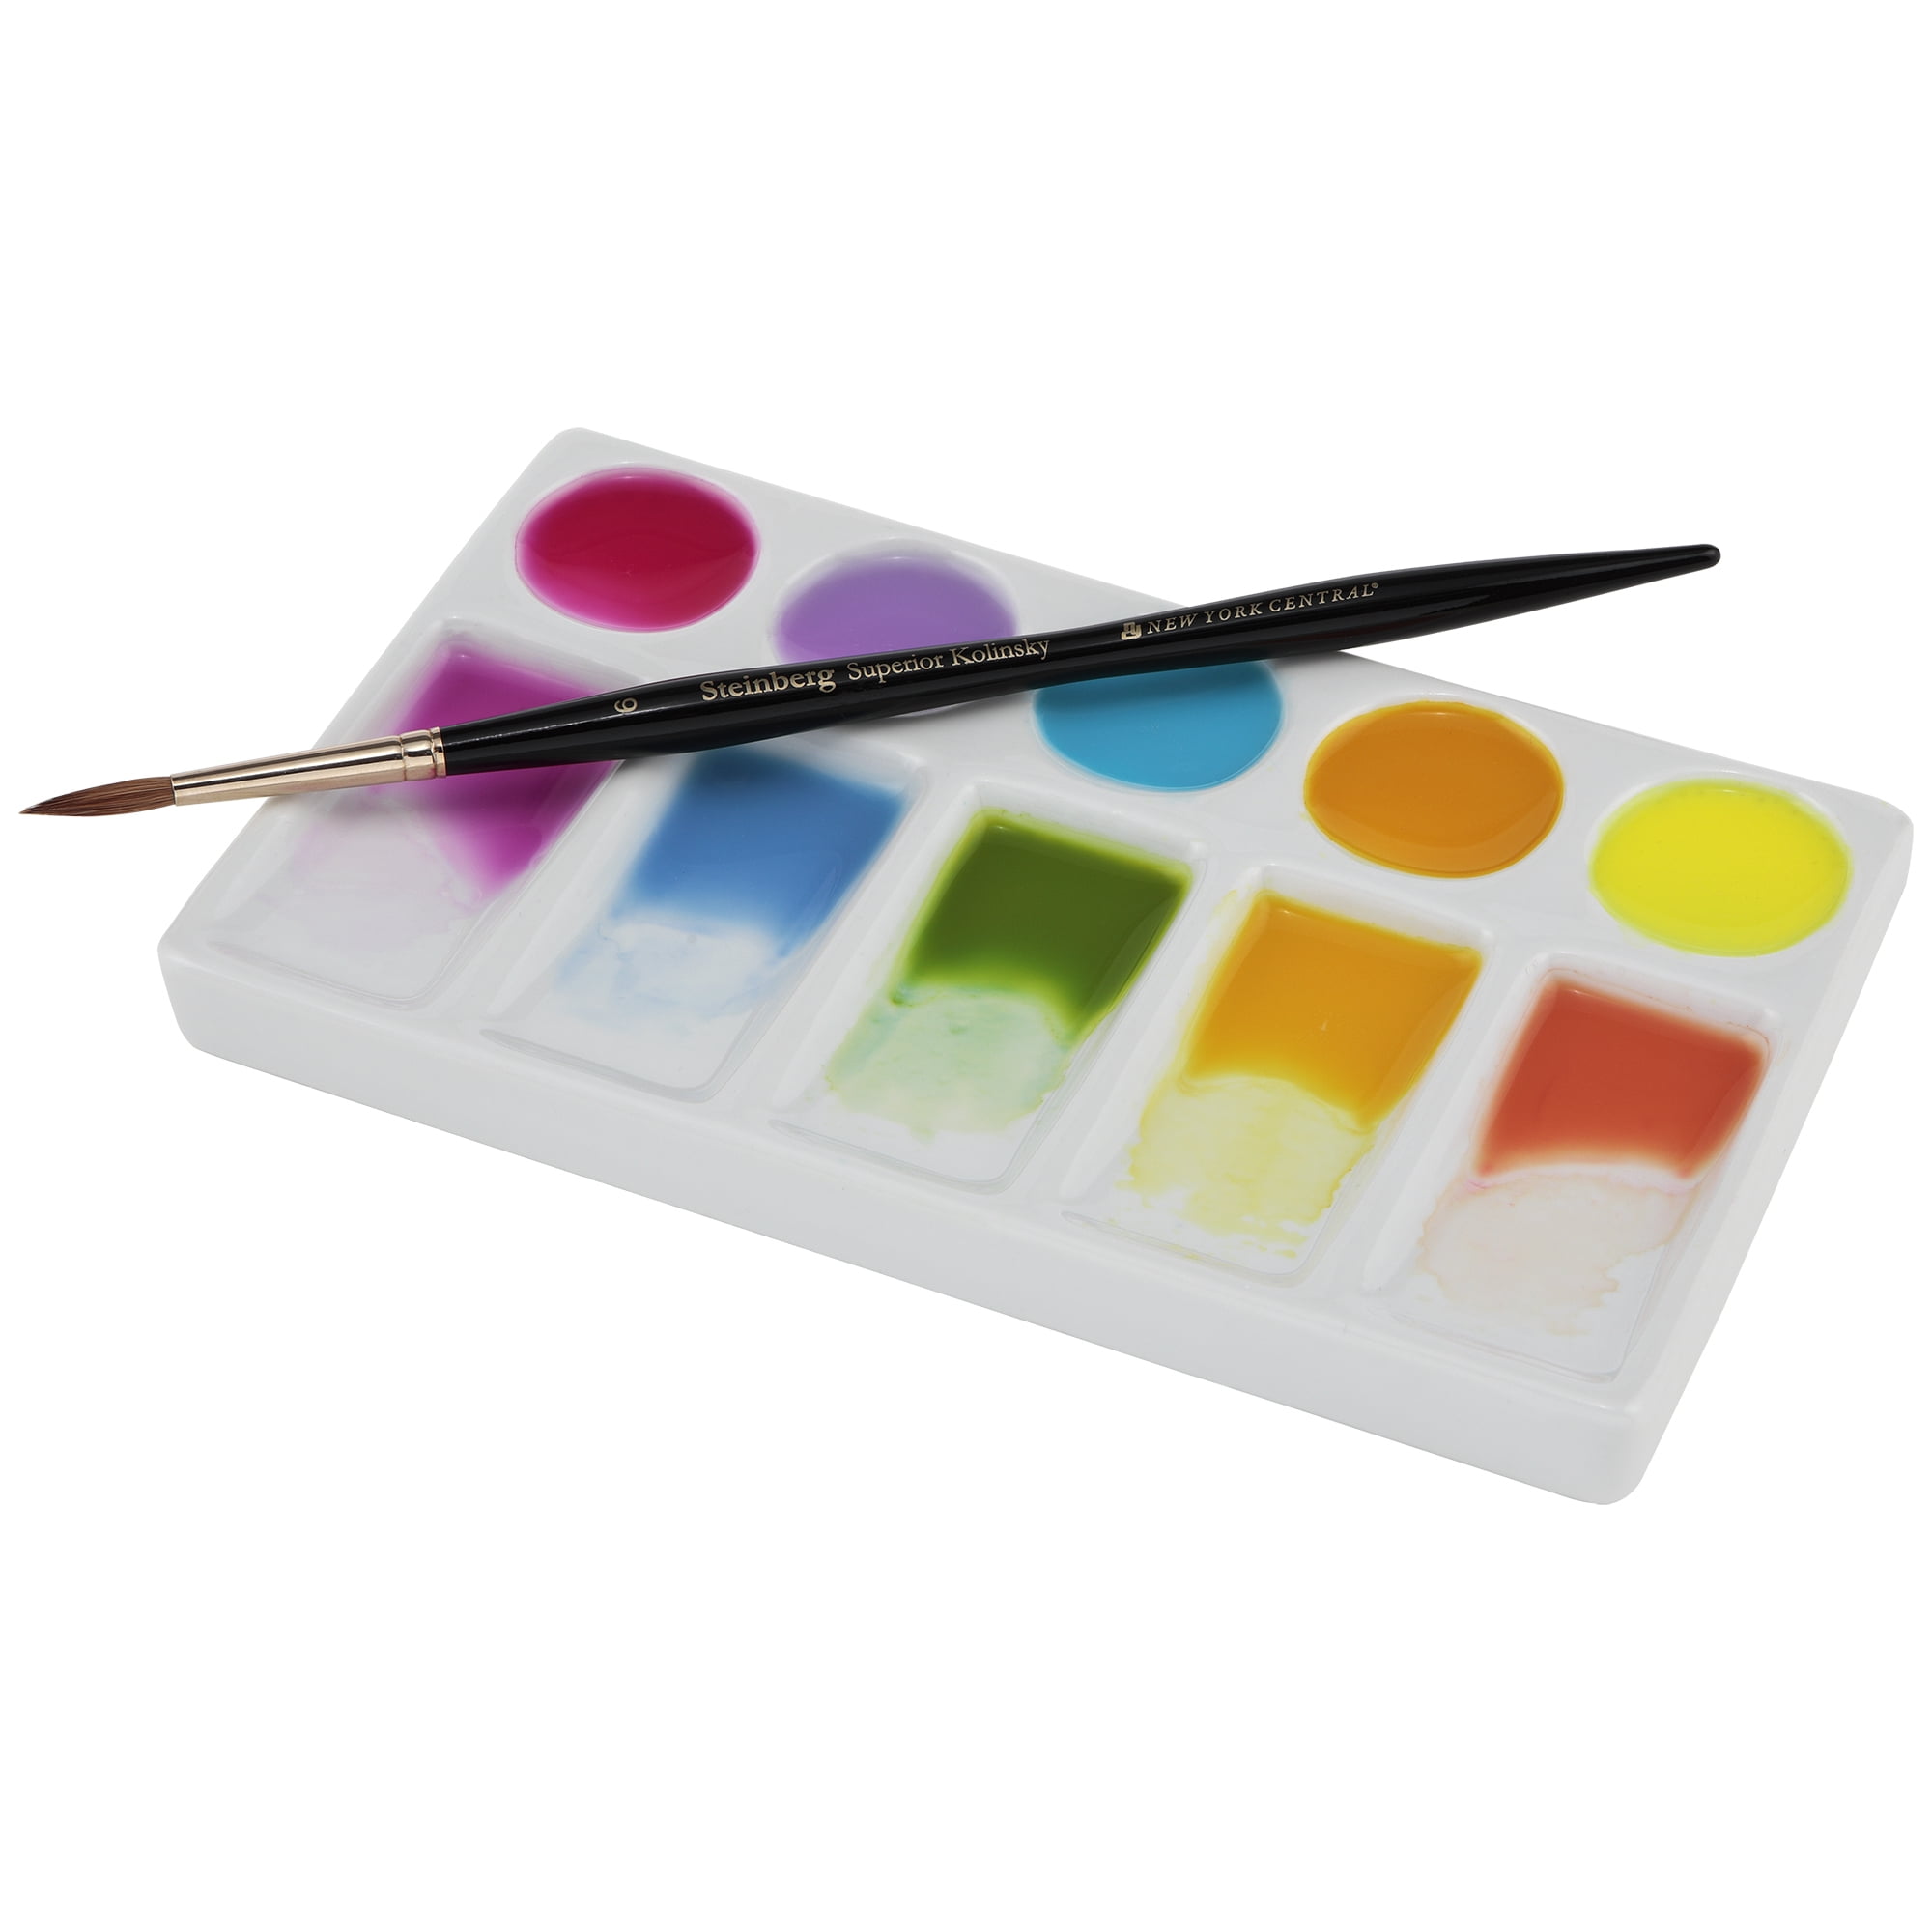  Creative Mark Butcher Tray Palette - Triple Coated Enamel Tray  Palette for Painting, Color Theory, Mixing, and More! - 11 x 15